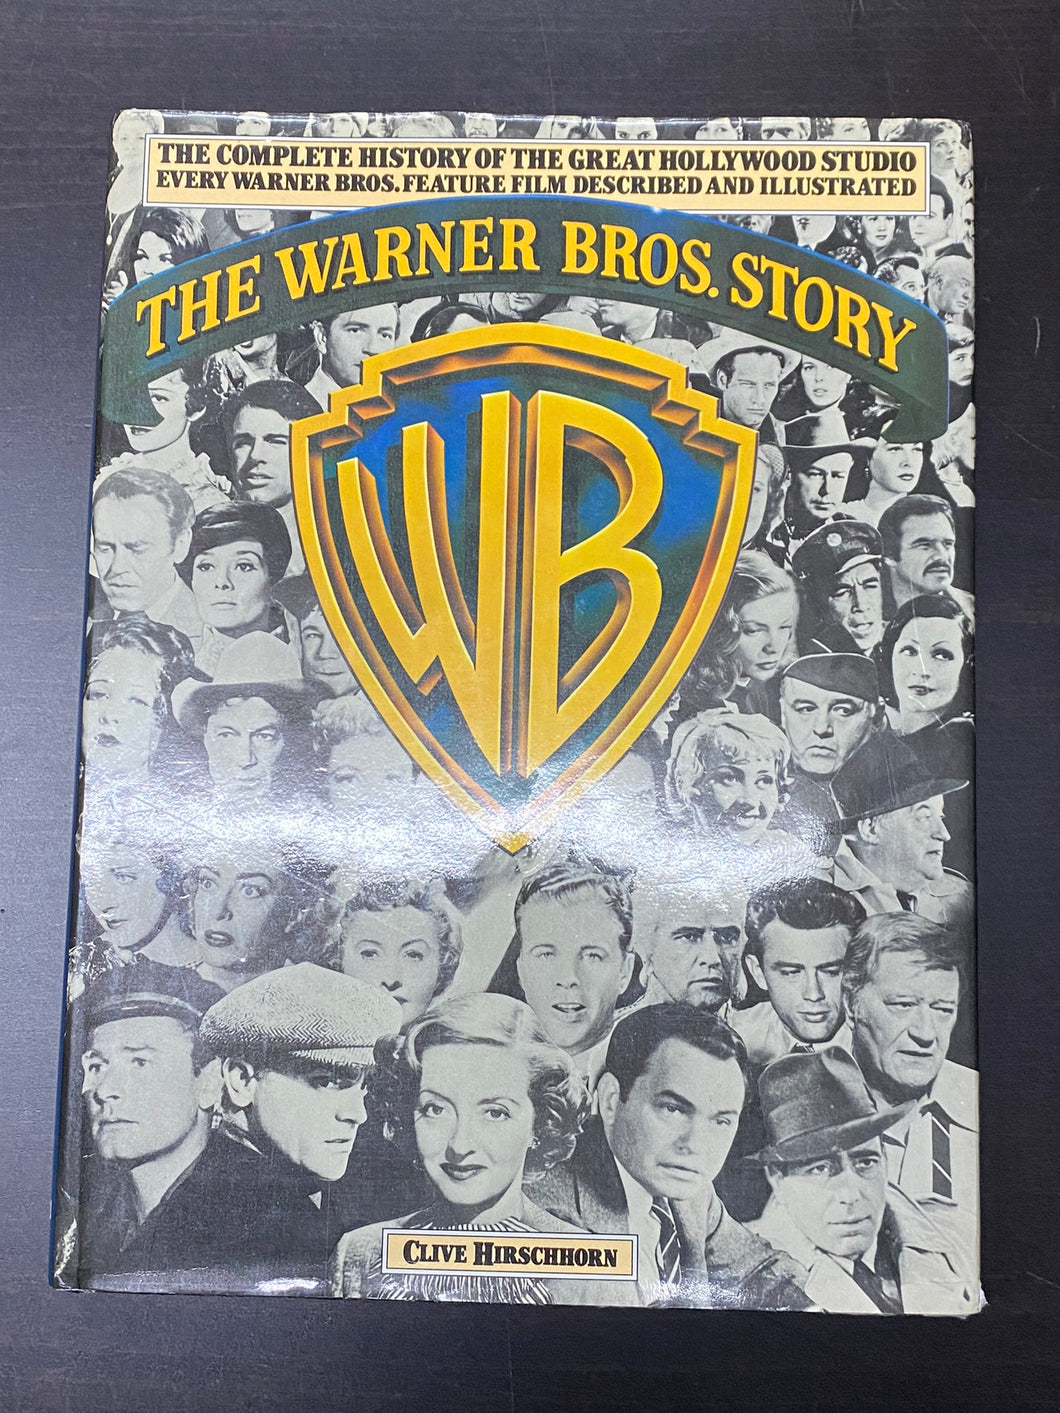 The Warner Bros. Story: The Complete History of Hollywood's Great Studio